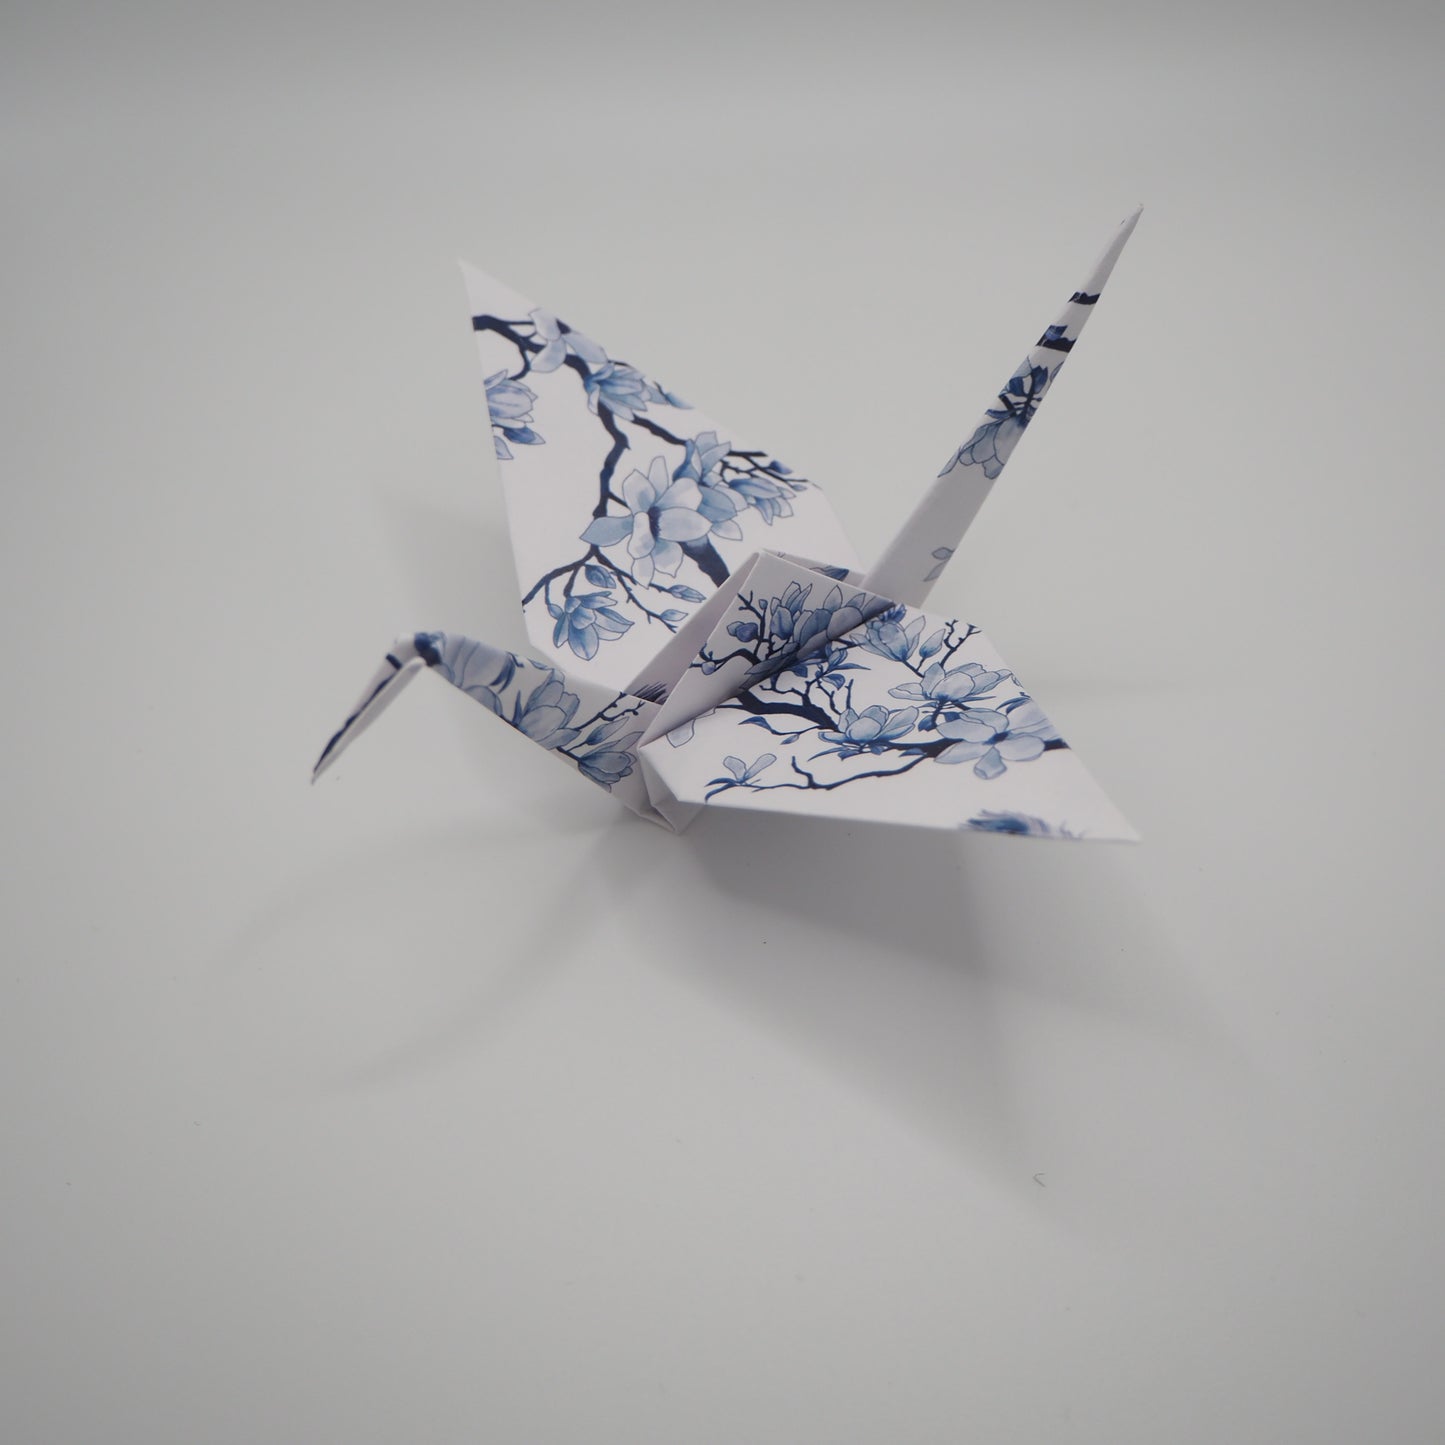 Pack of 10 Origami Cranes - Blue & White Porcelain